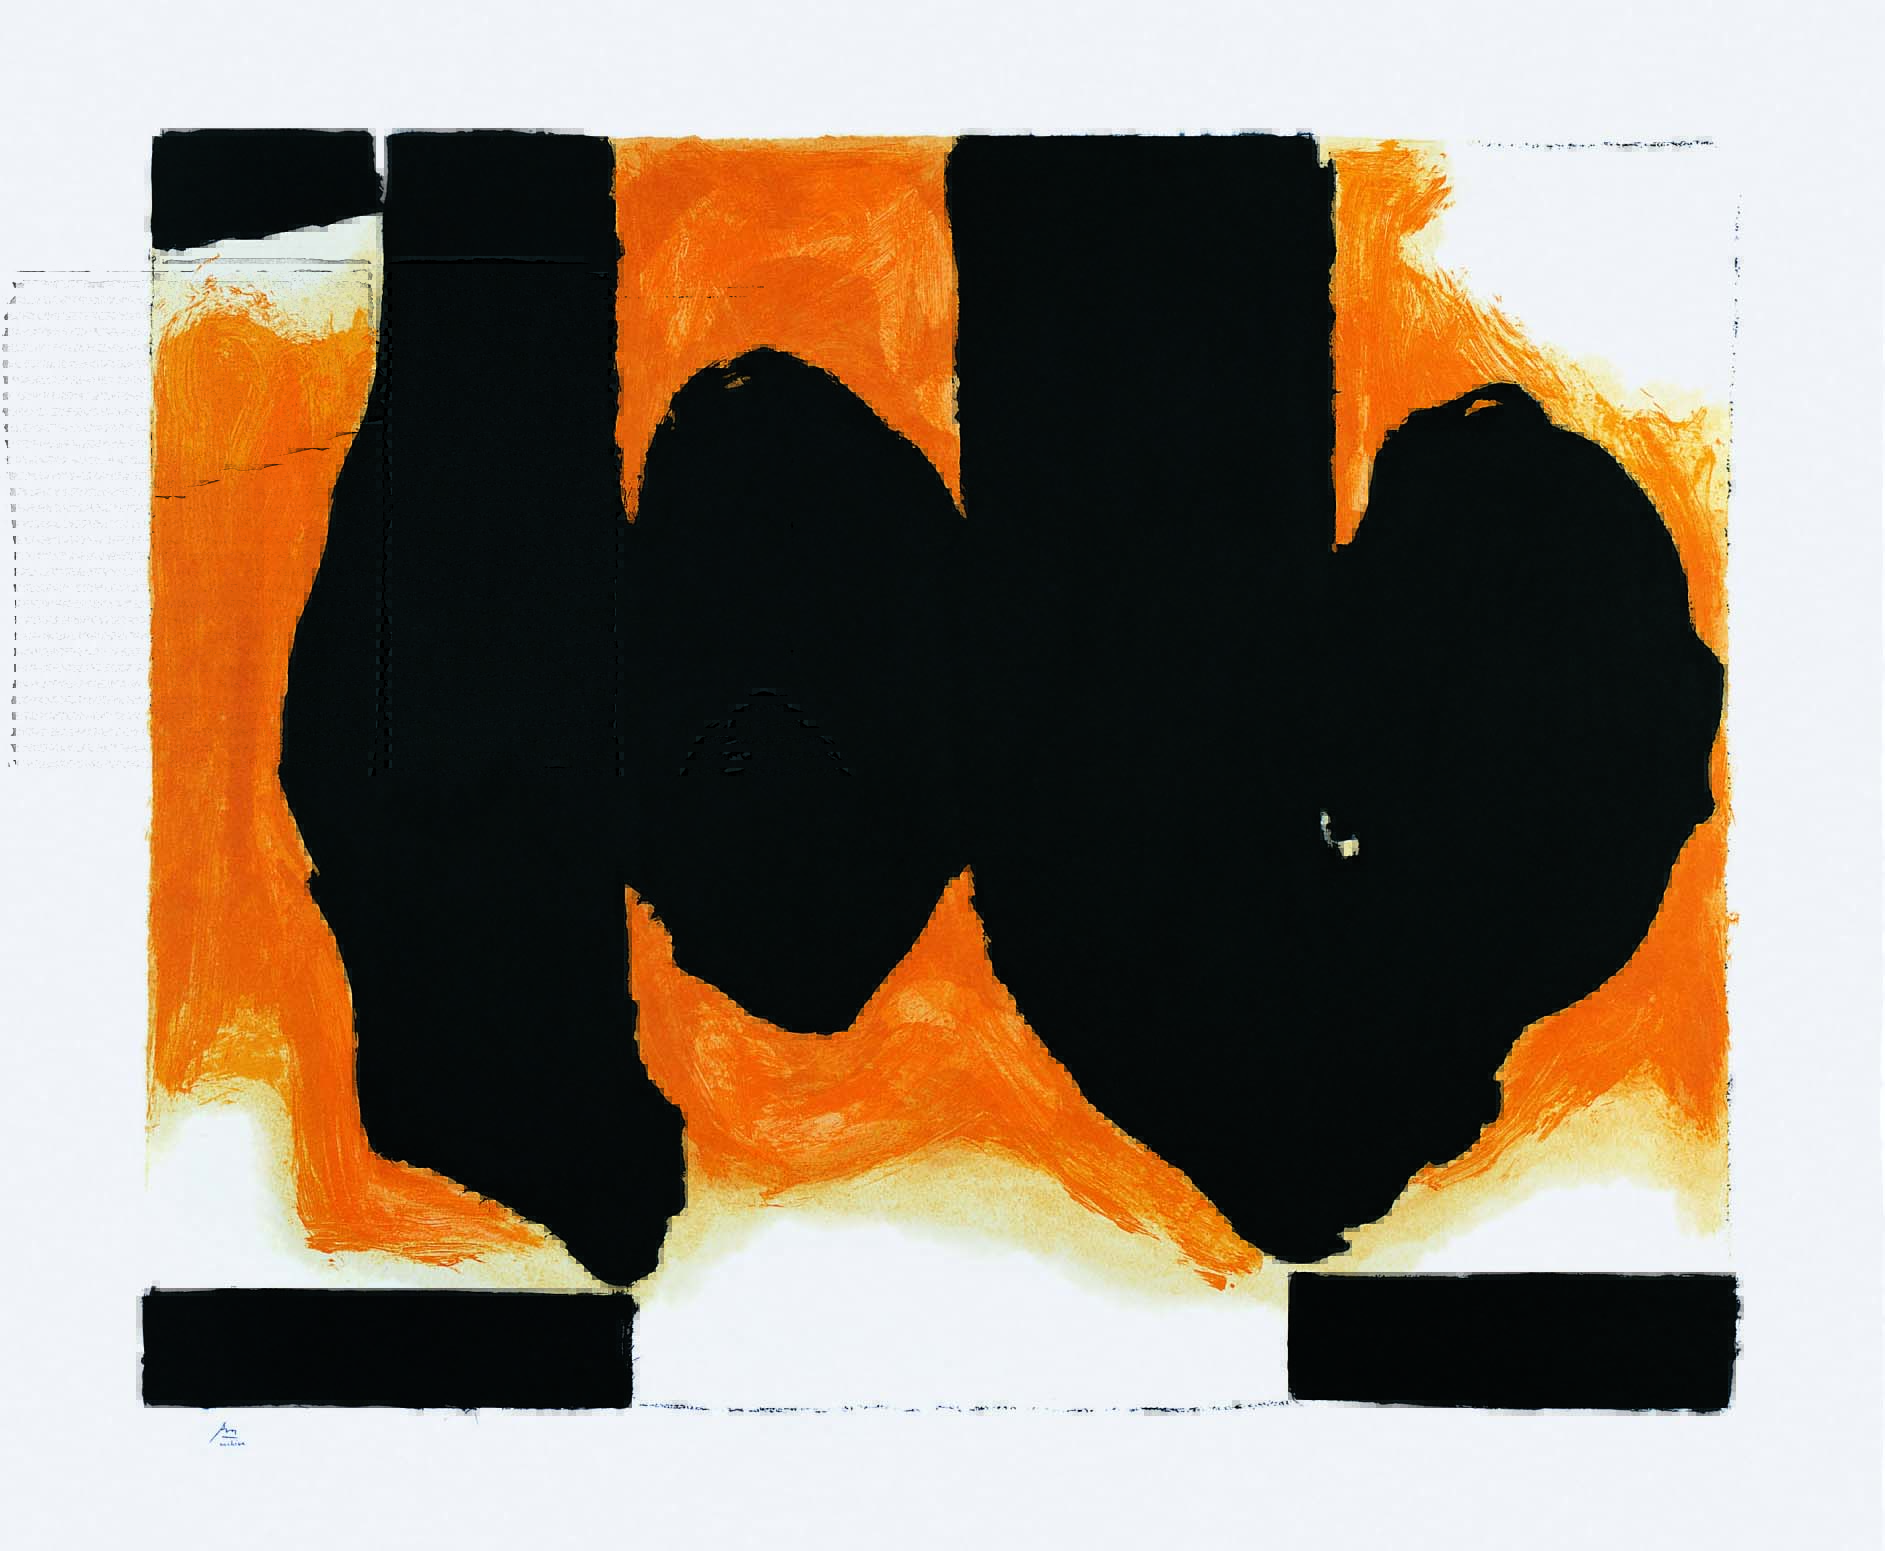 Burning Elegy, 1991. Lithograph with hand coloring, 52 ½ x 63 1/14 inches (133.4 x 160.7 cm)